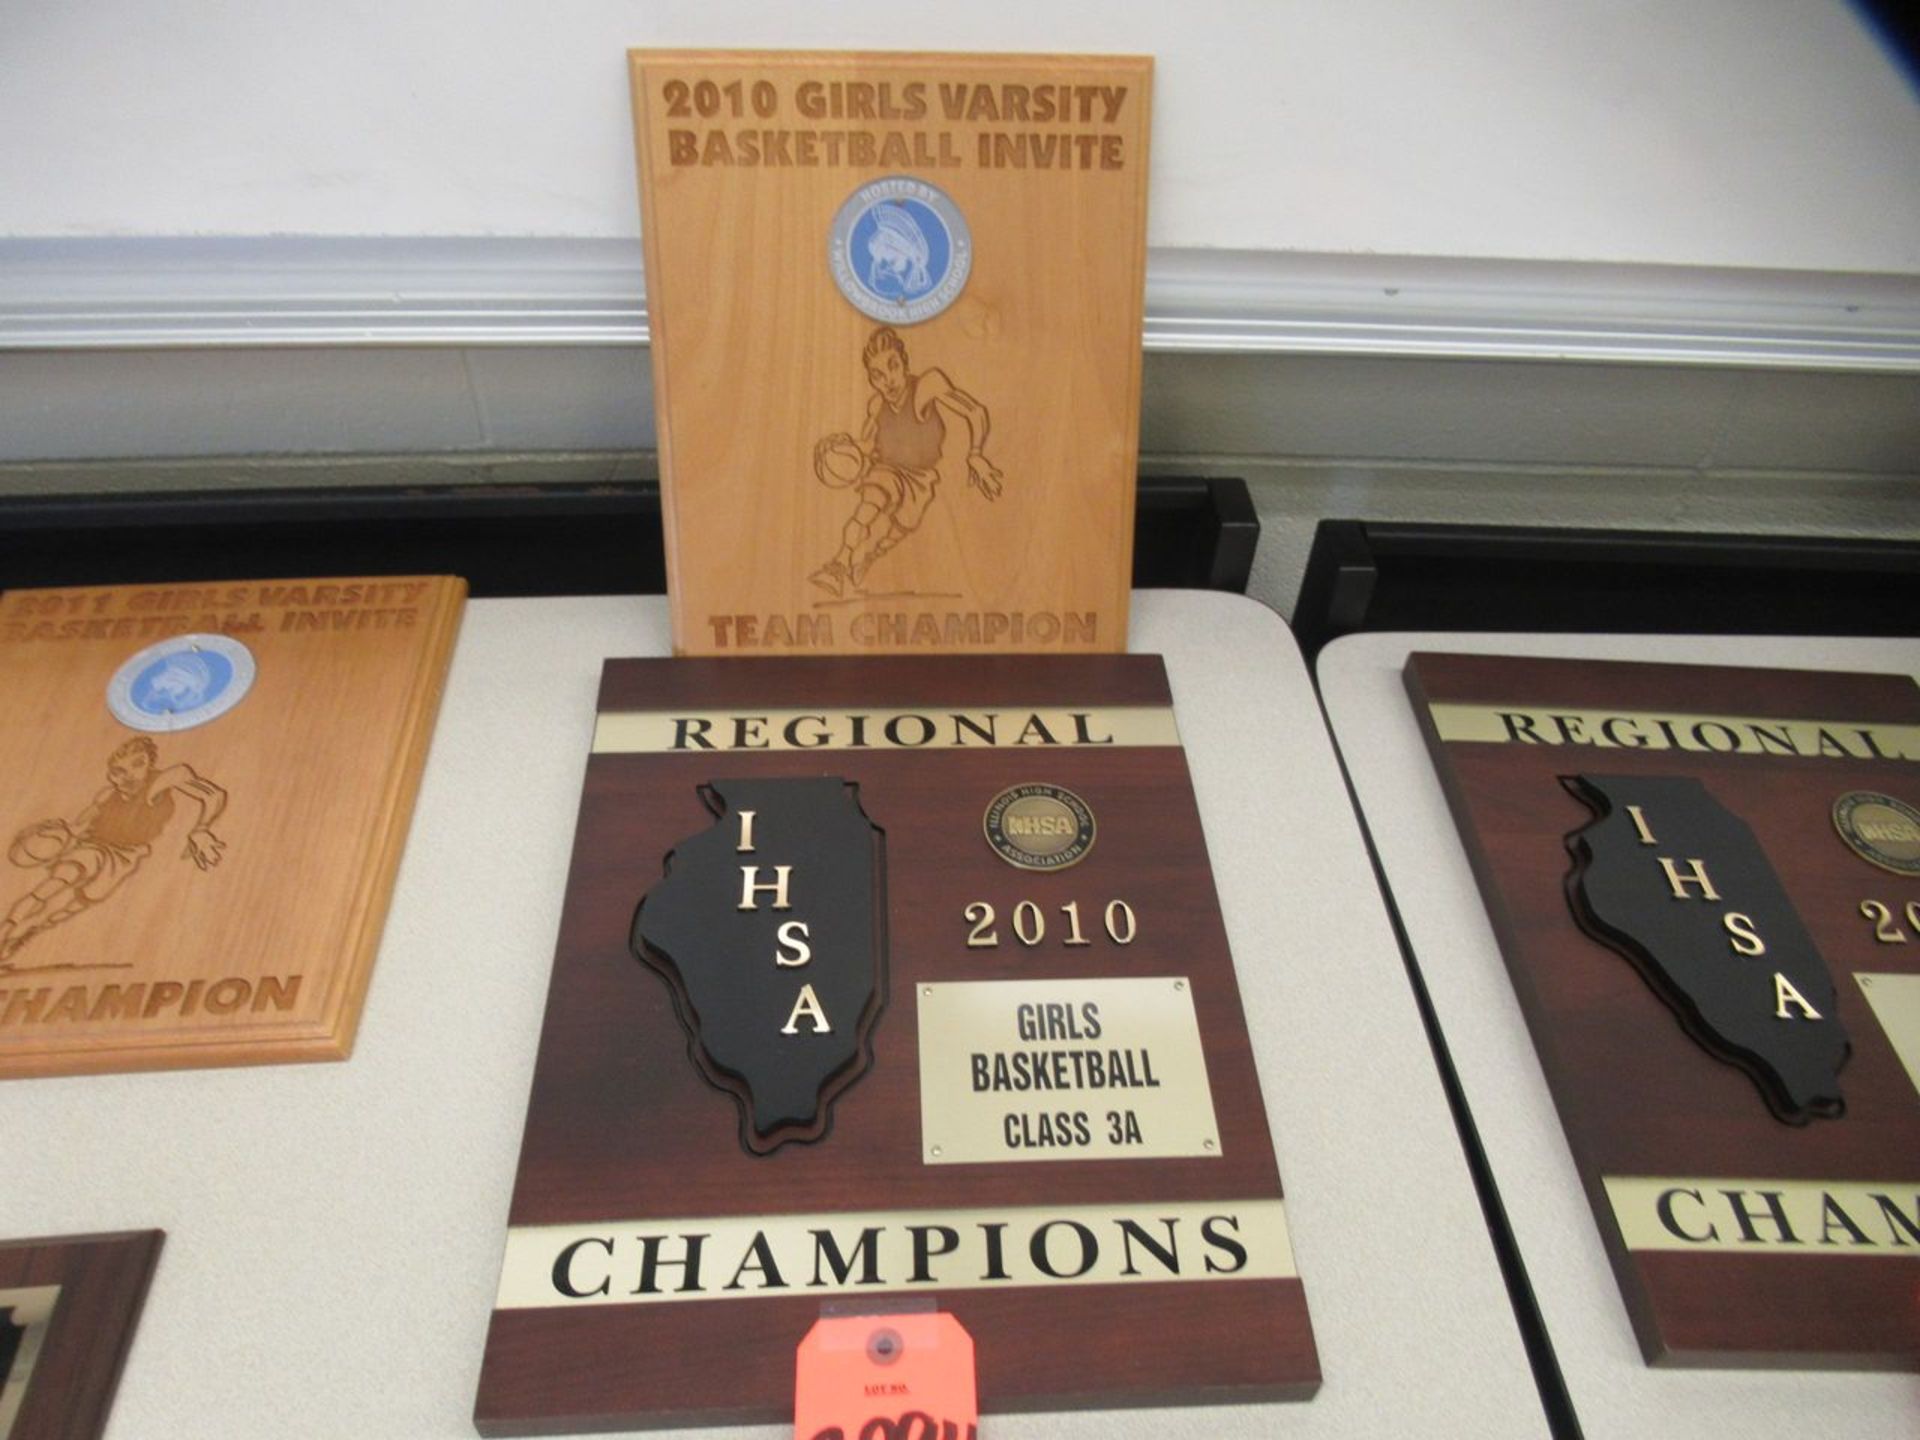 2010 IHSA Girls Classic 3A Regional Champions Plaque with Team Photo, 2010 Willowbrook Girls Varsity